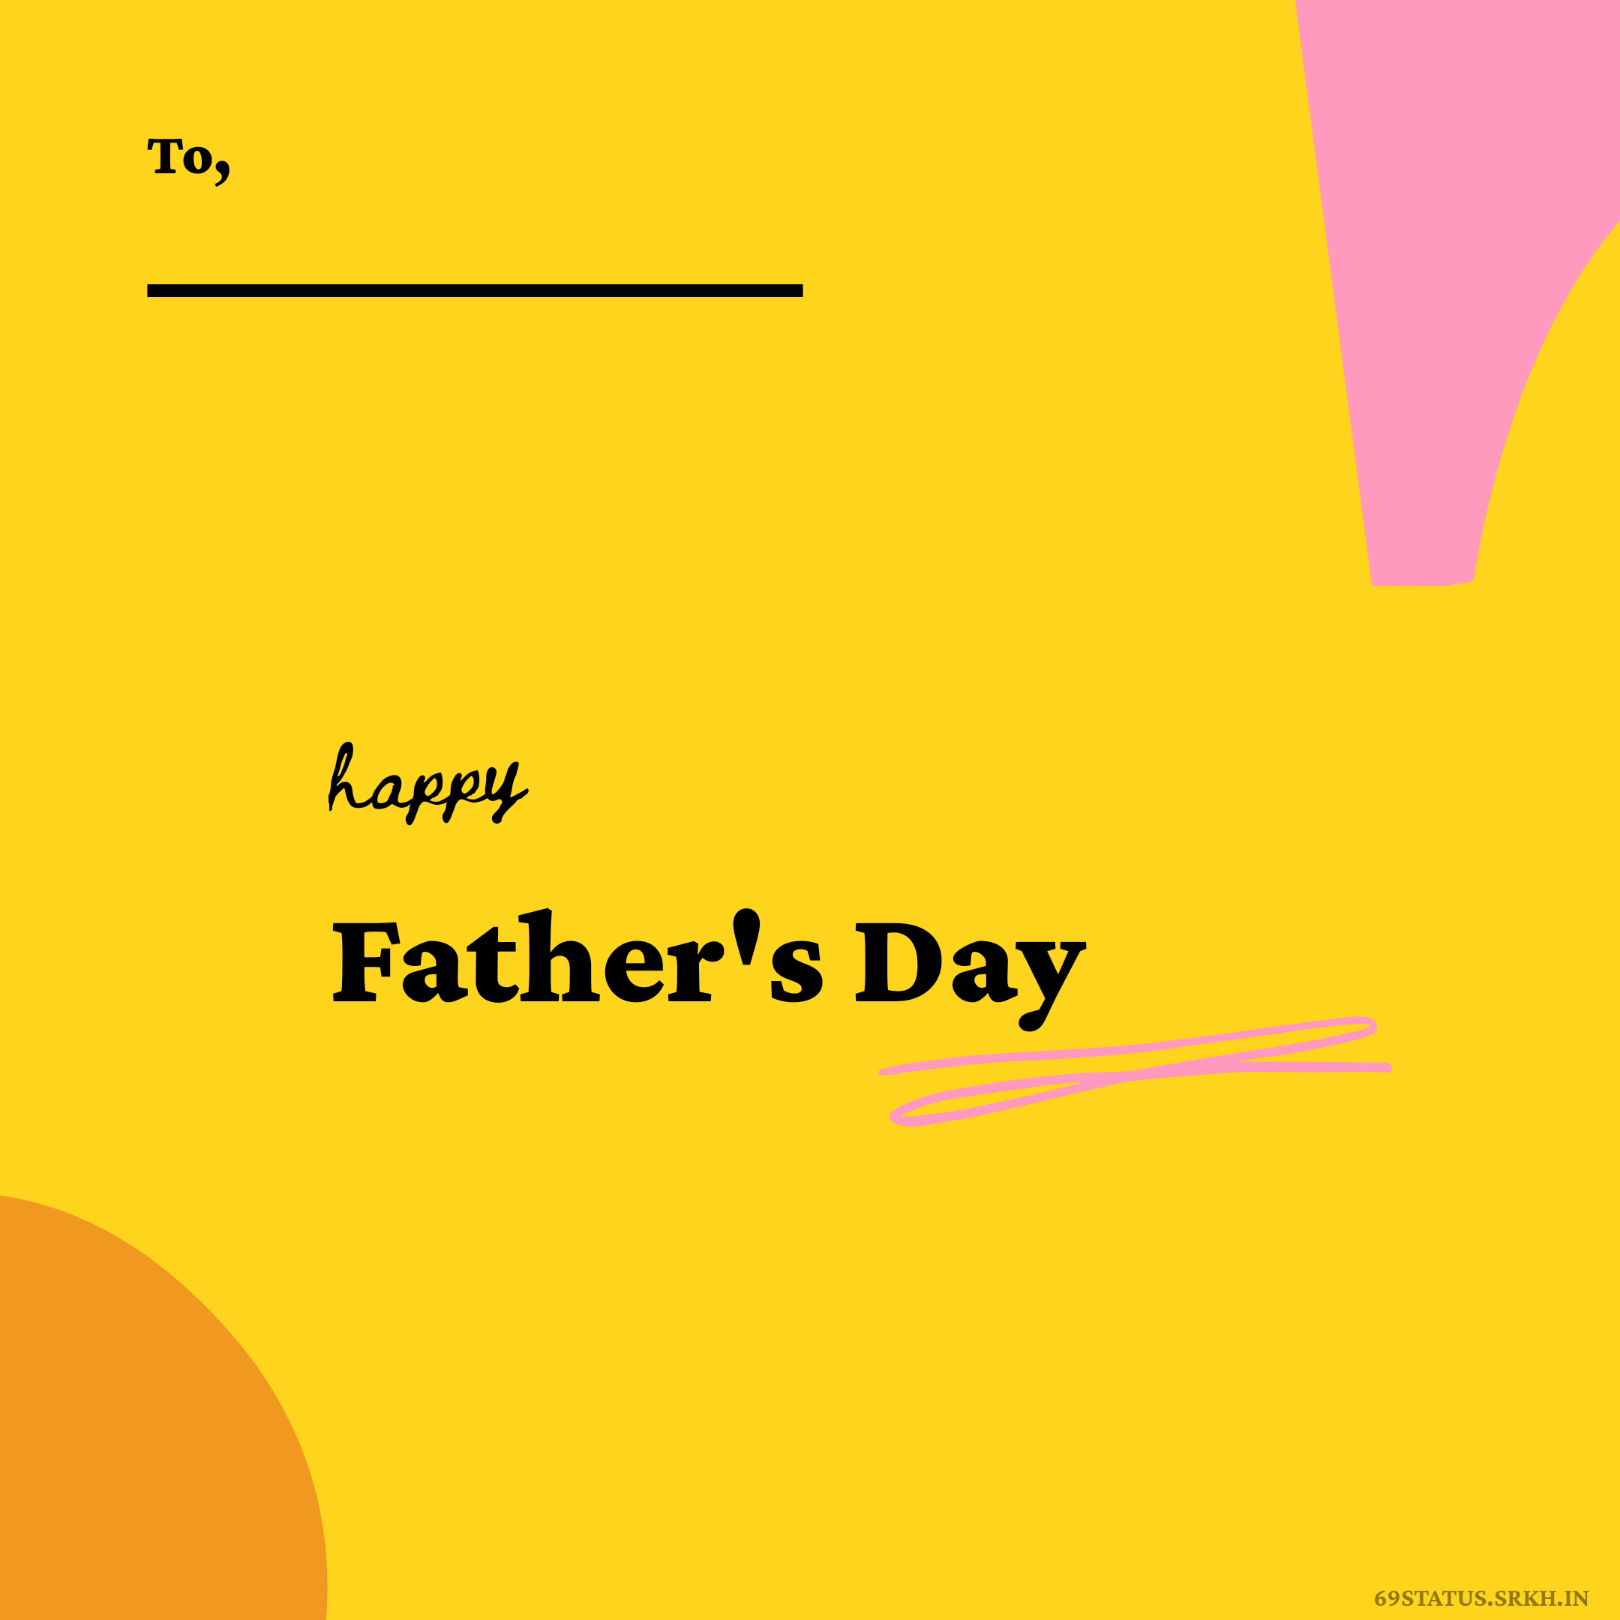 Happy Father’s Day Image with Name